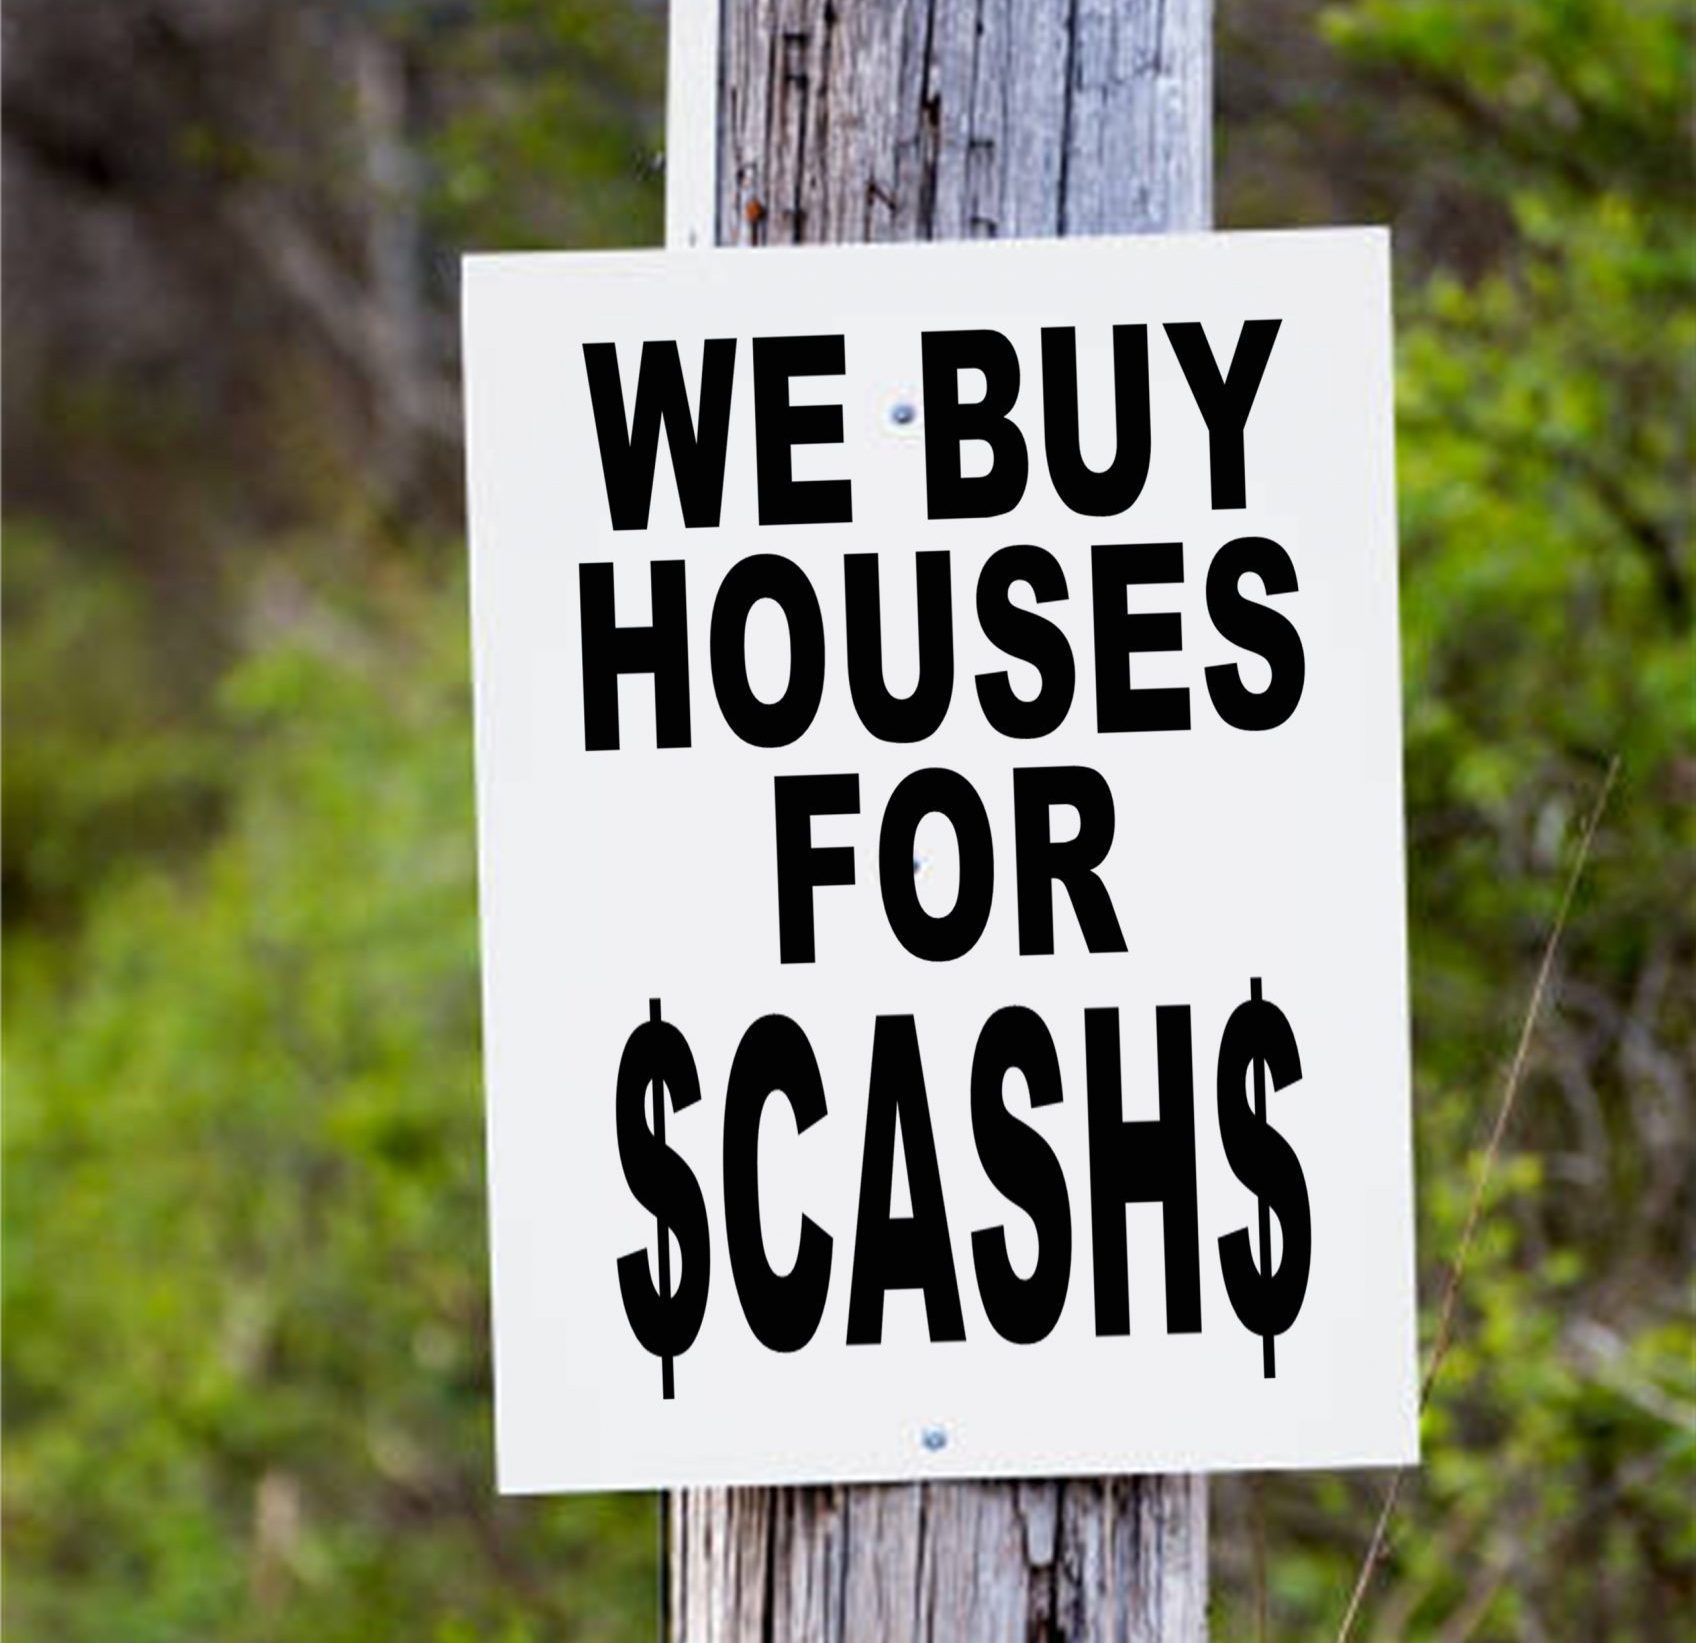 White sign on a pole saying "We Buy Houses For $CASH$"